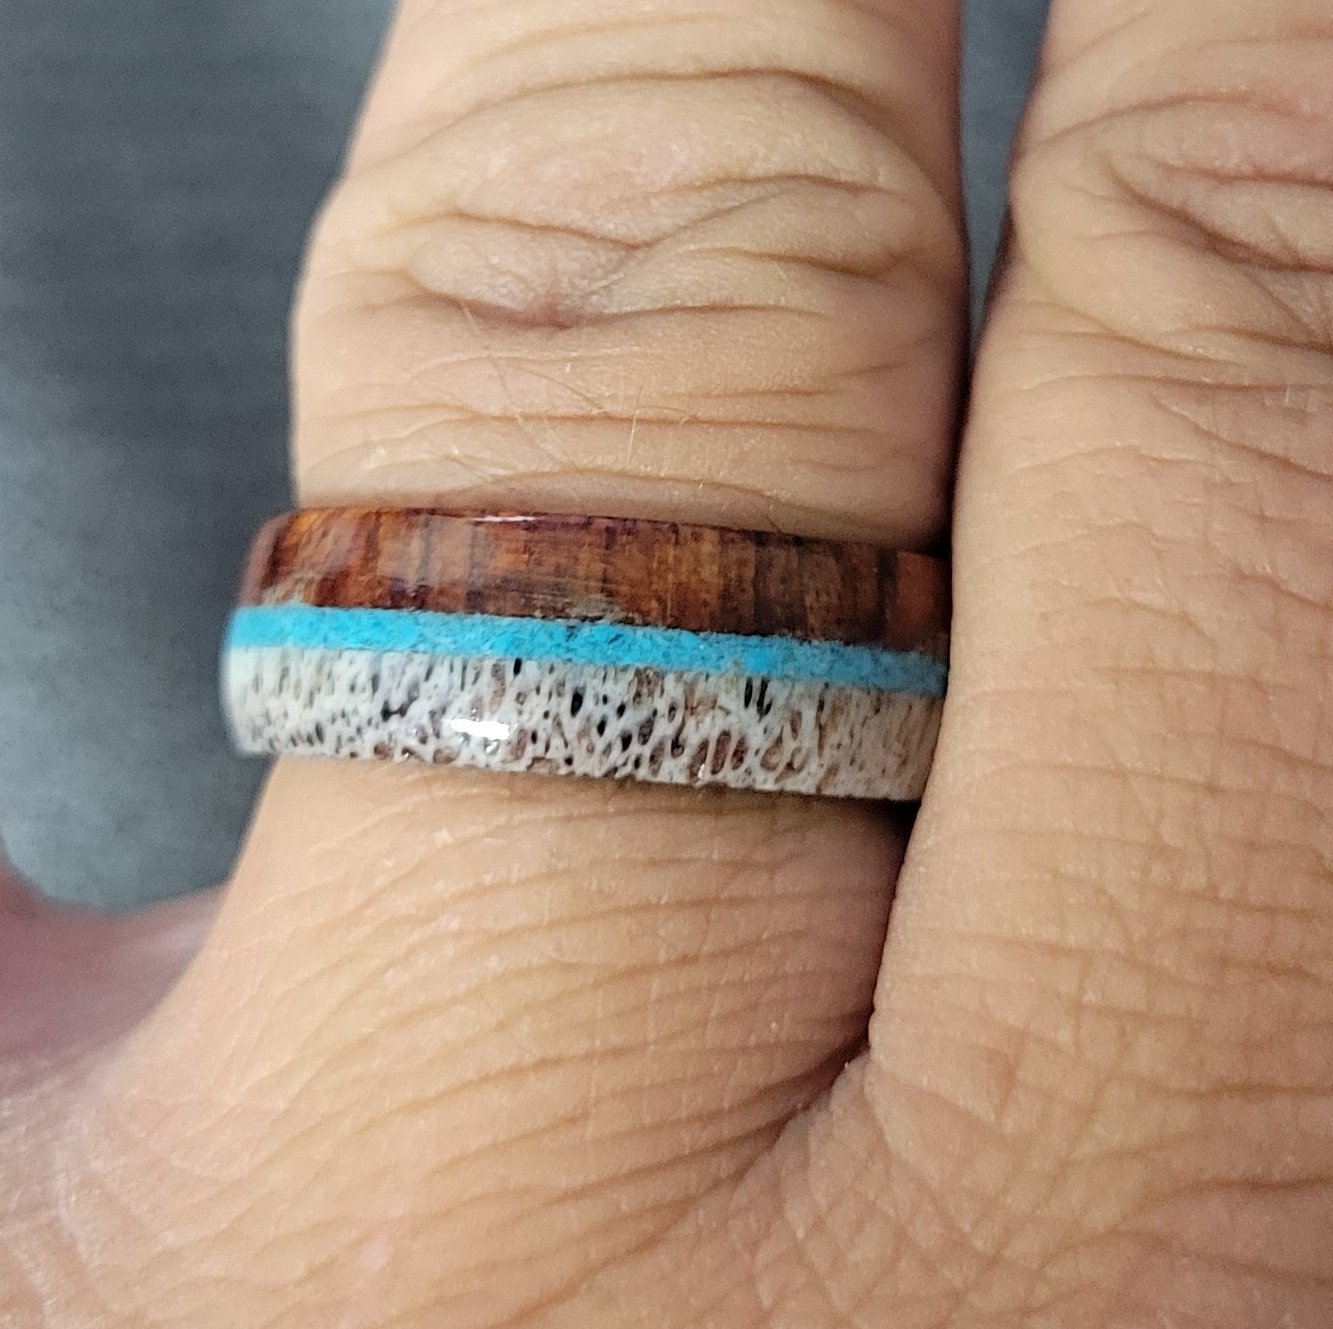 ThinkEngraved Promise Ring Personalized Men's Promise Ring - Turquoise, Antler and Wood Inlay Real Tungsten